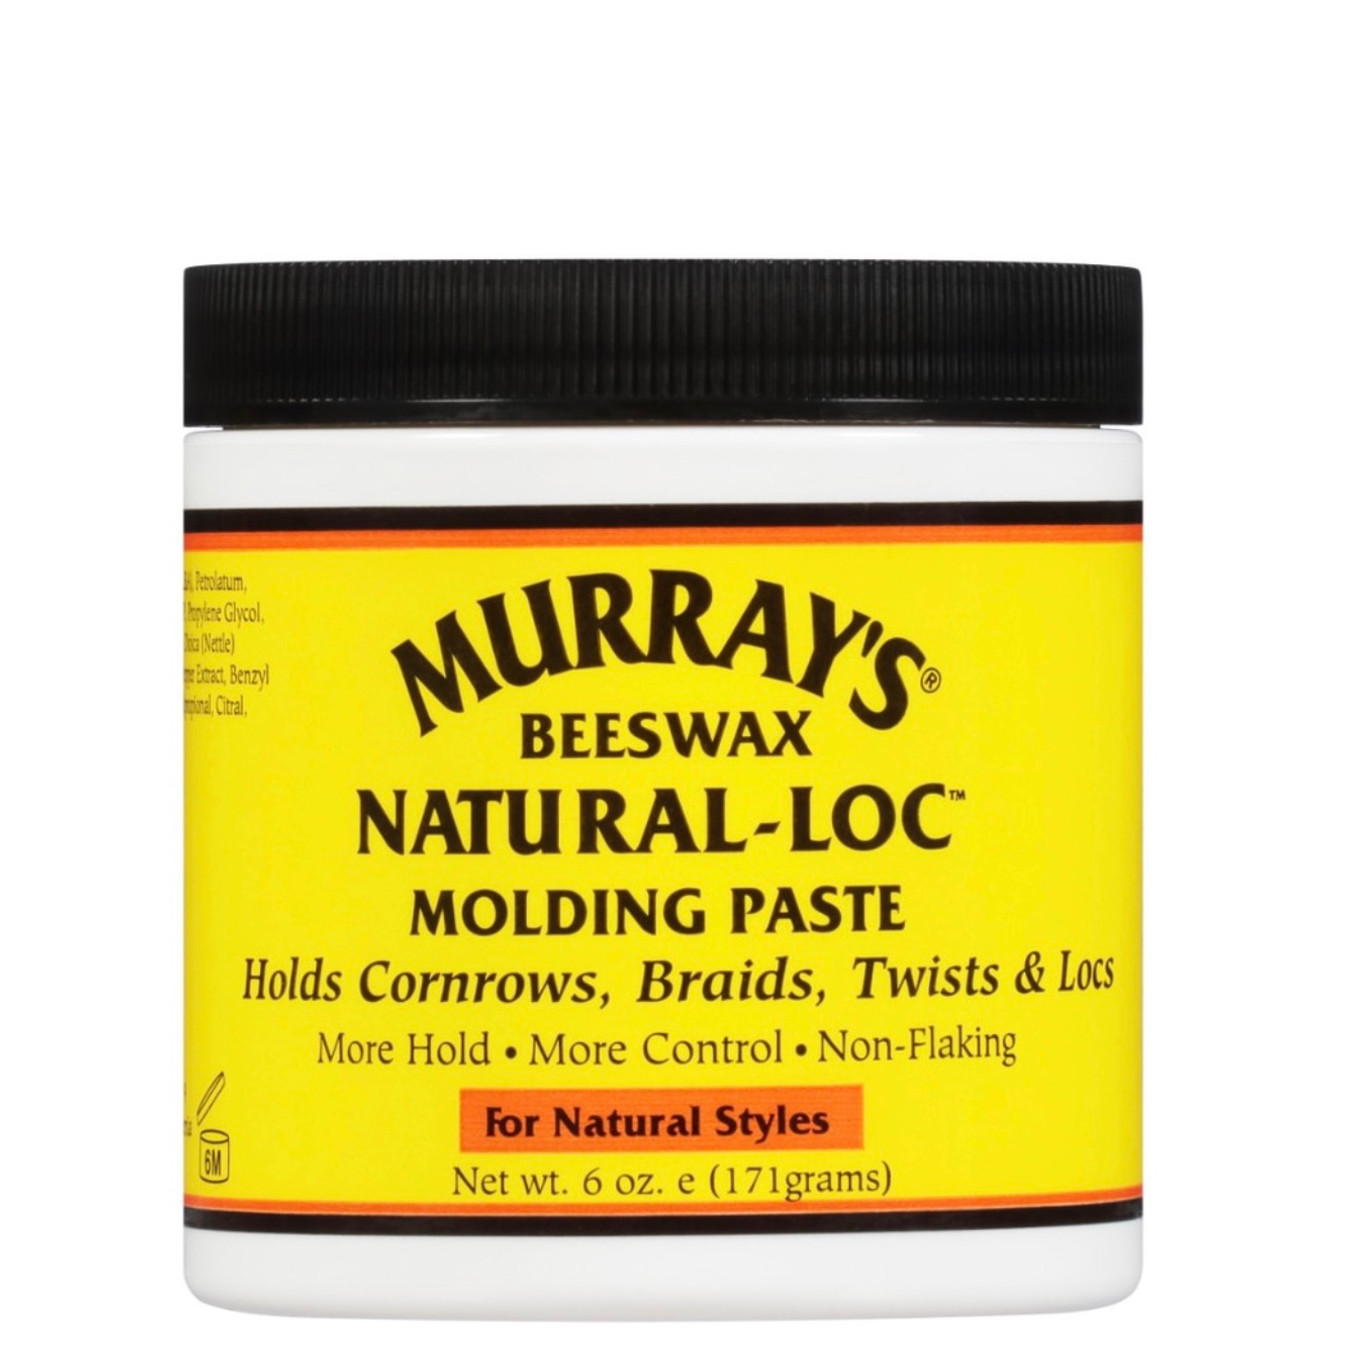 Murrays Beeswax Natural-Loc Molding Paste